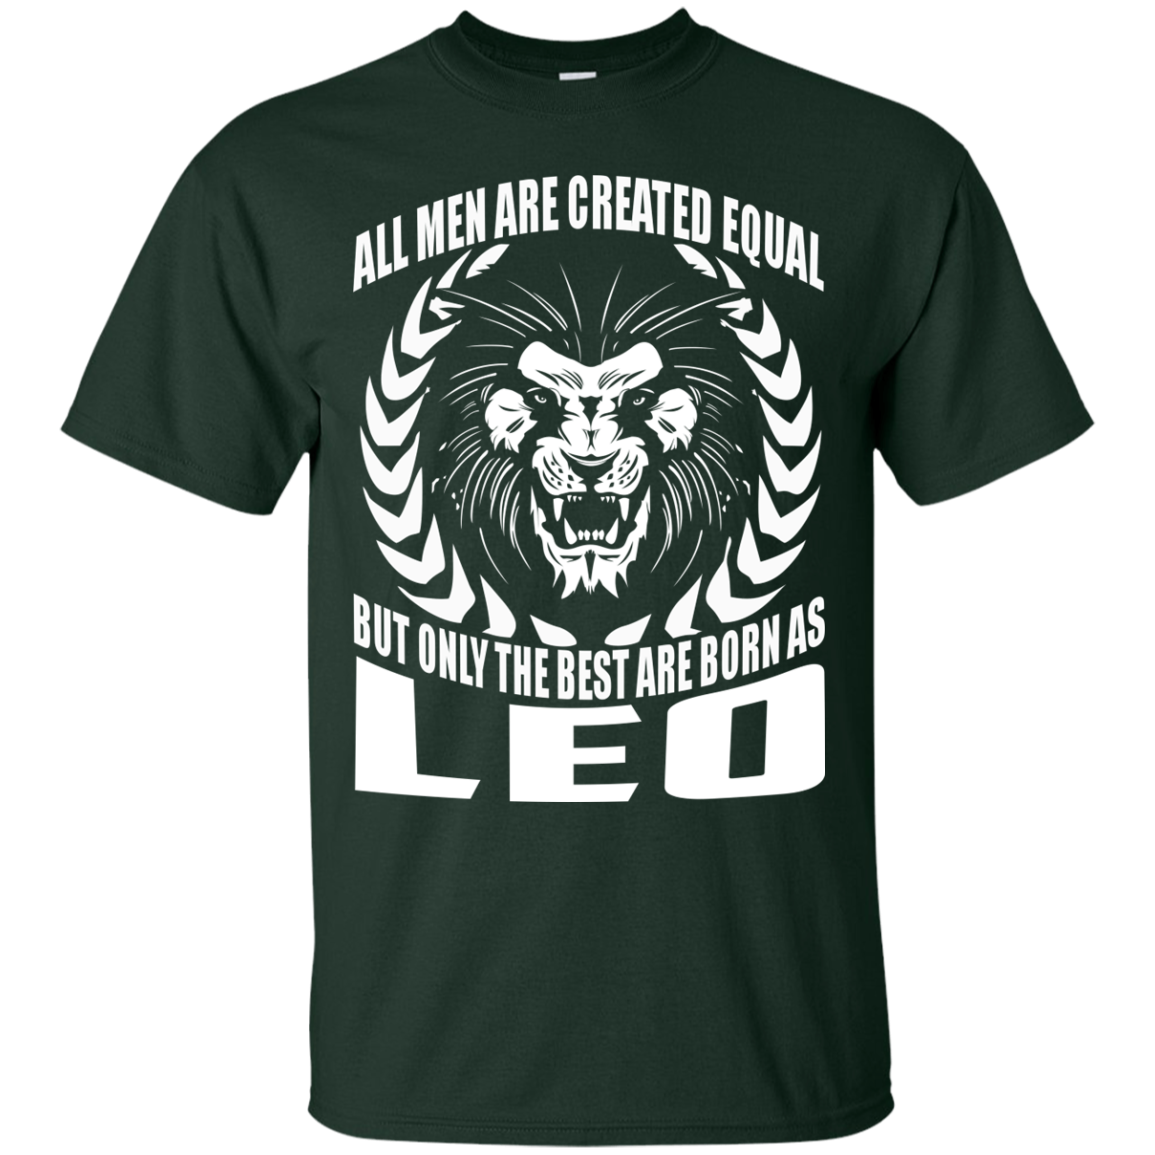 Only the best are born as Leo shirts - Zodiac Tees